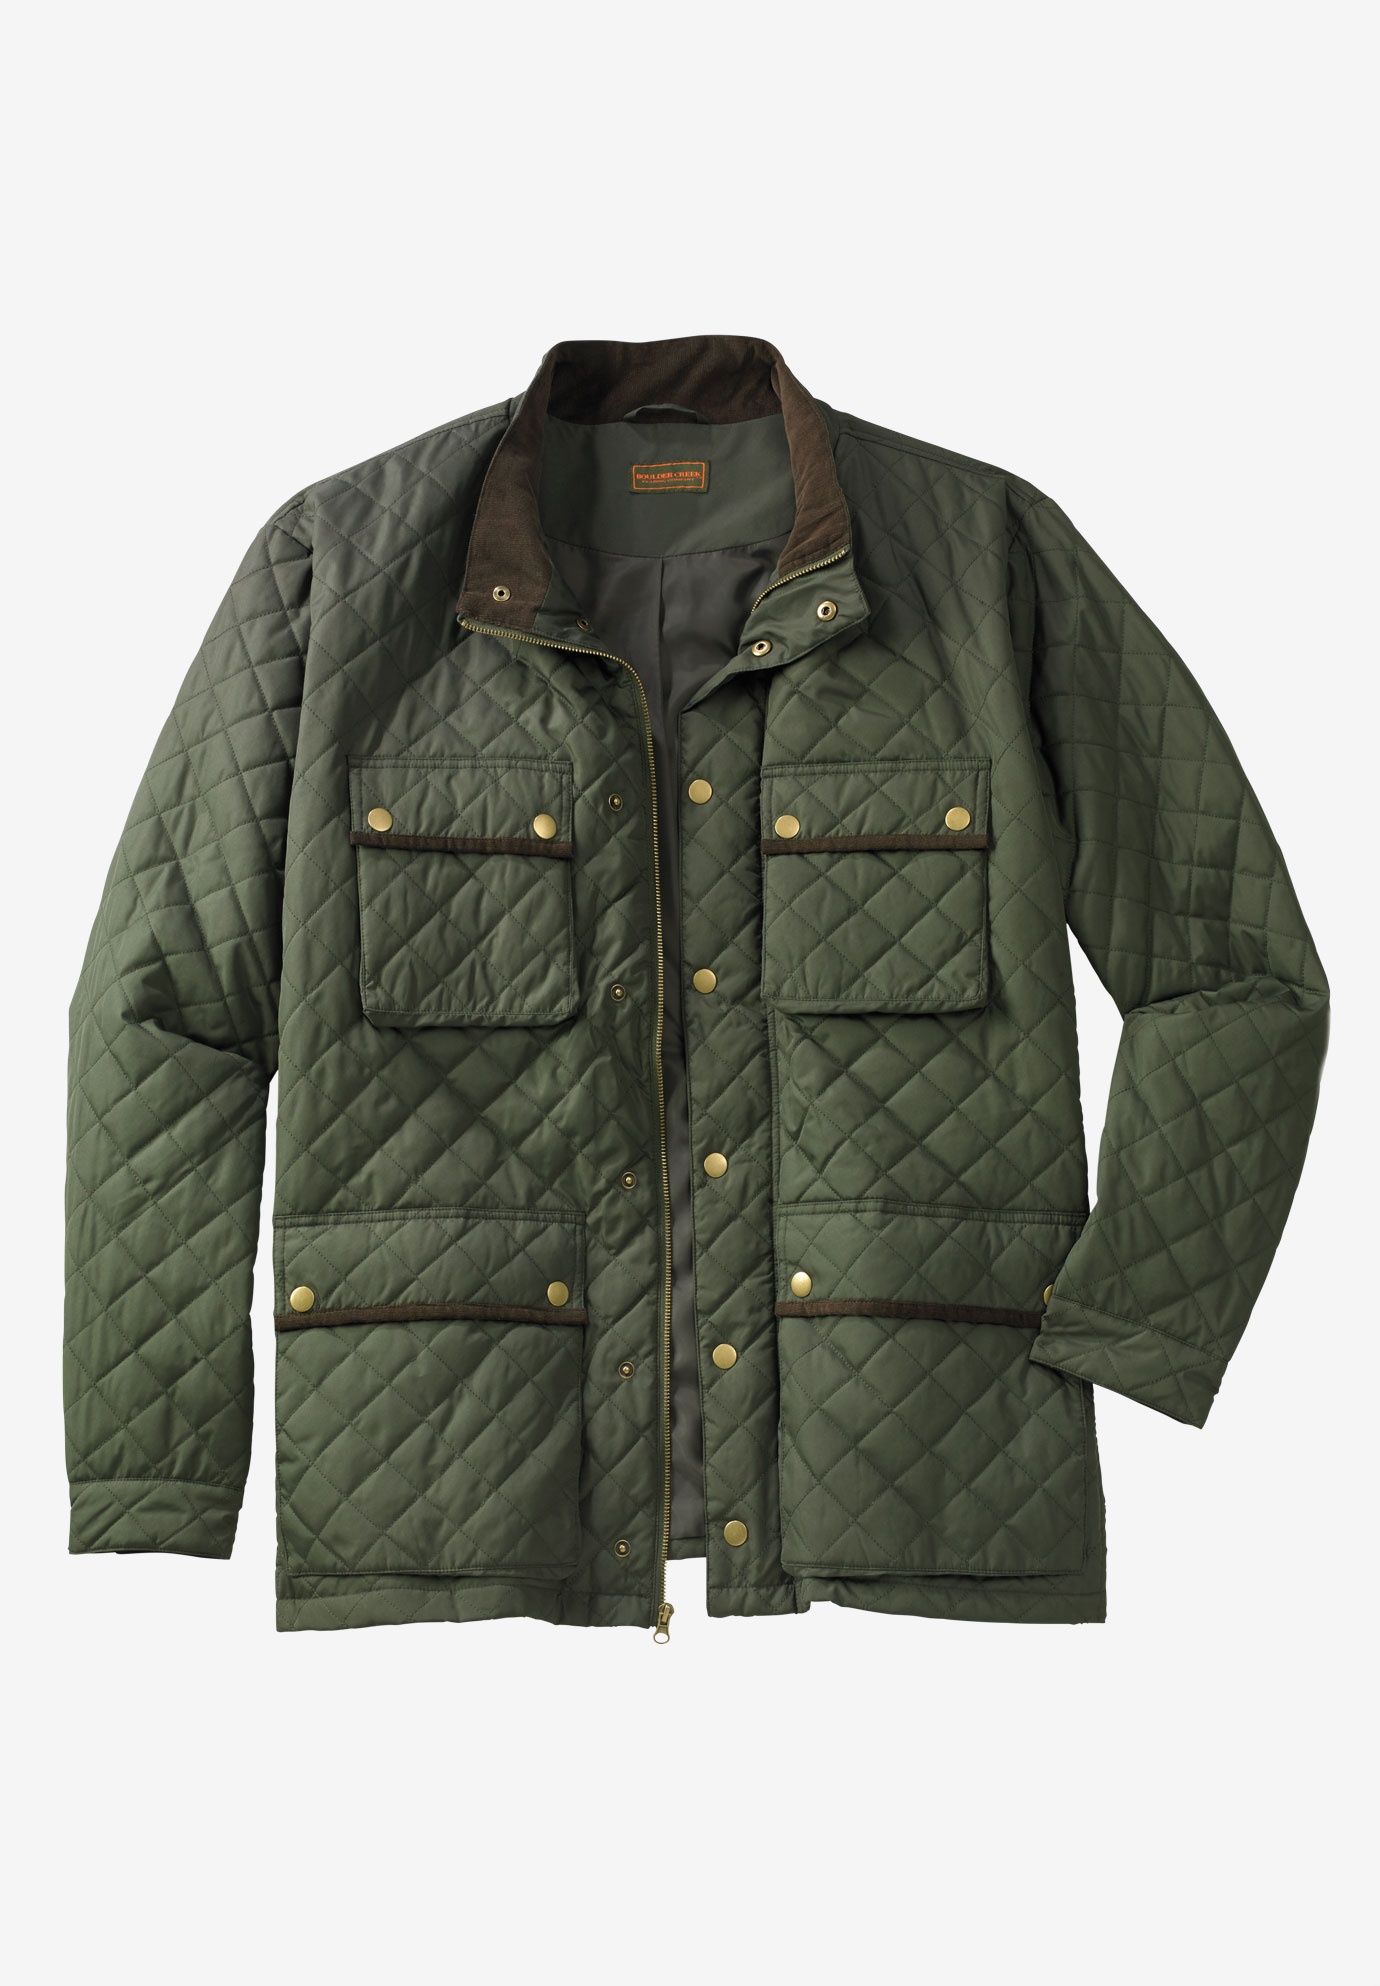 Boulder Creek® Quilted Jacket| Big and Tall Outerwear | King Size